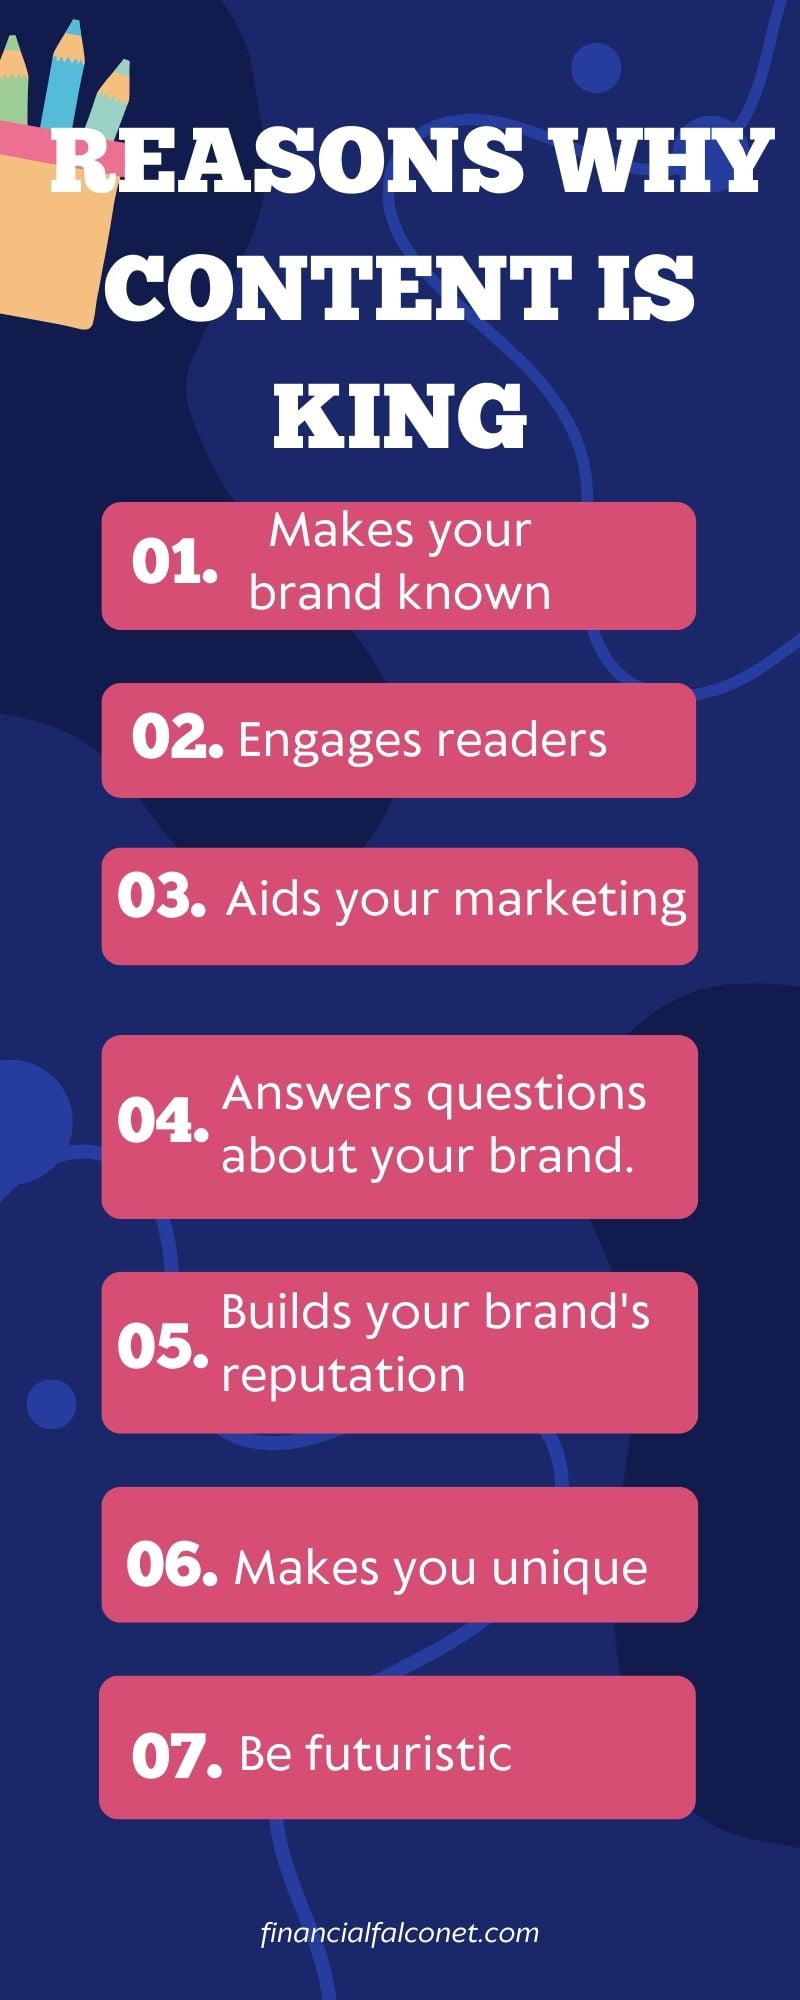 Content is king, marketing is queen. This is an infographic showing 7 reasons why content is king.